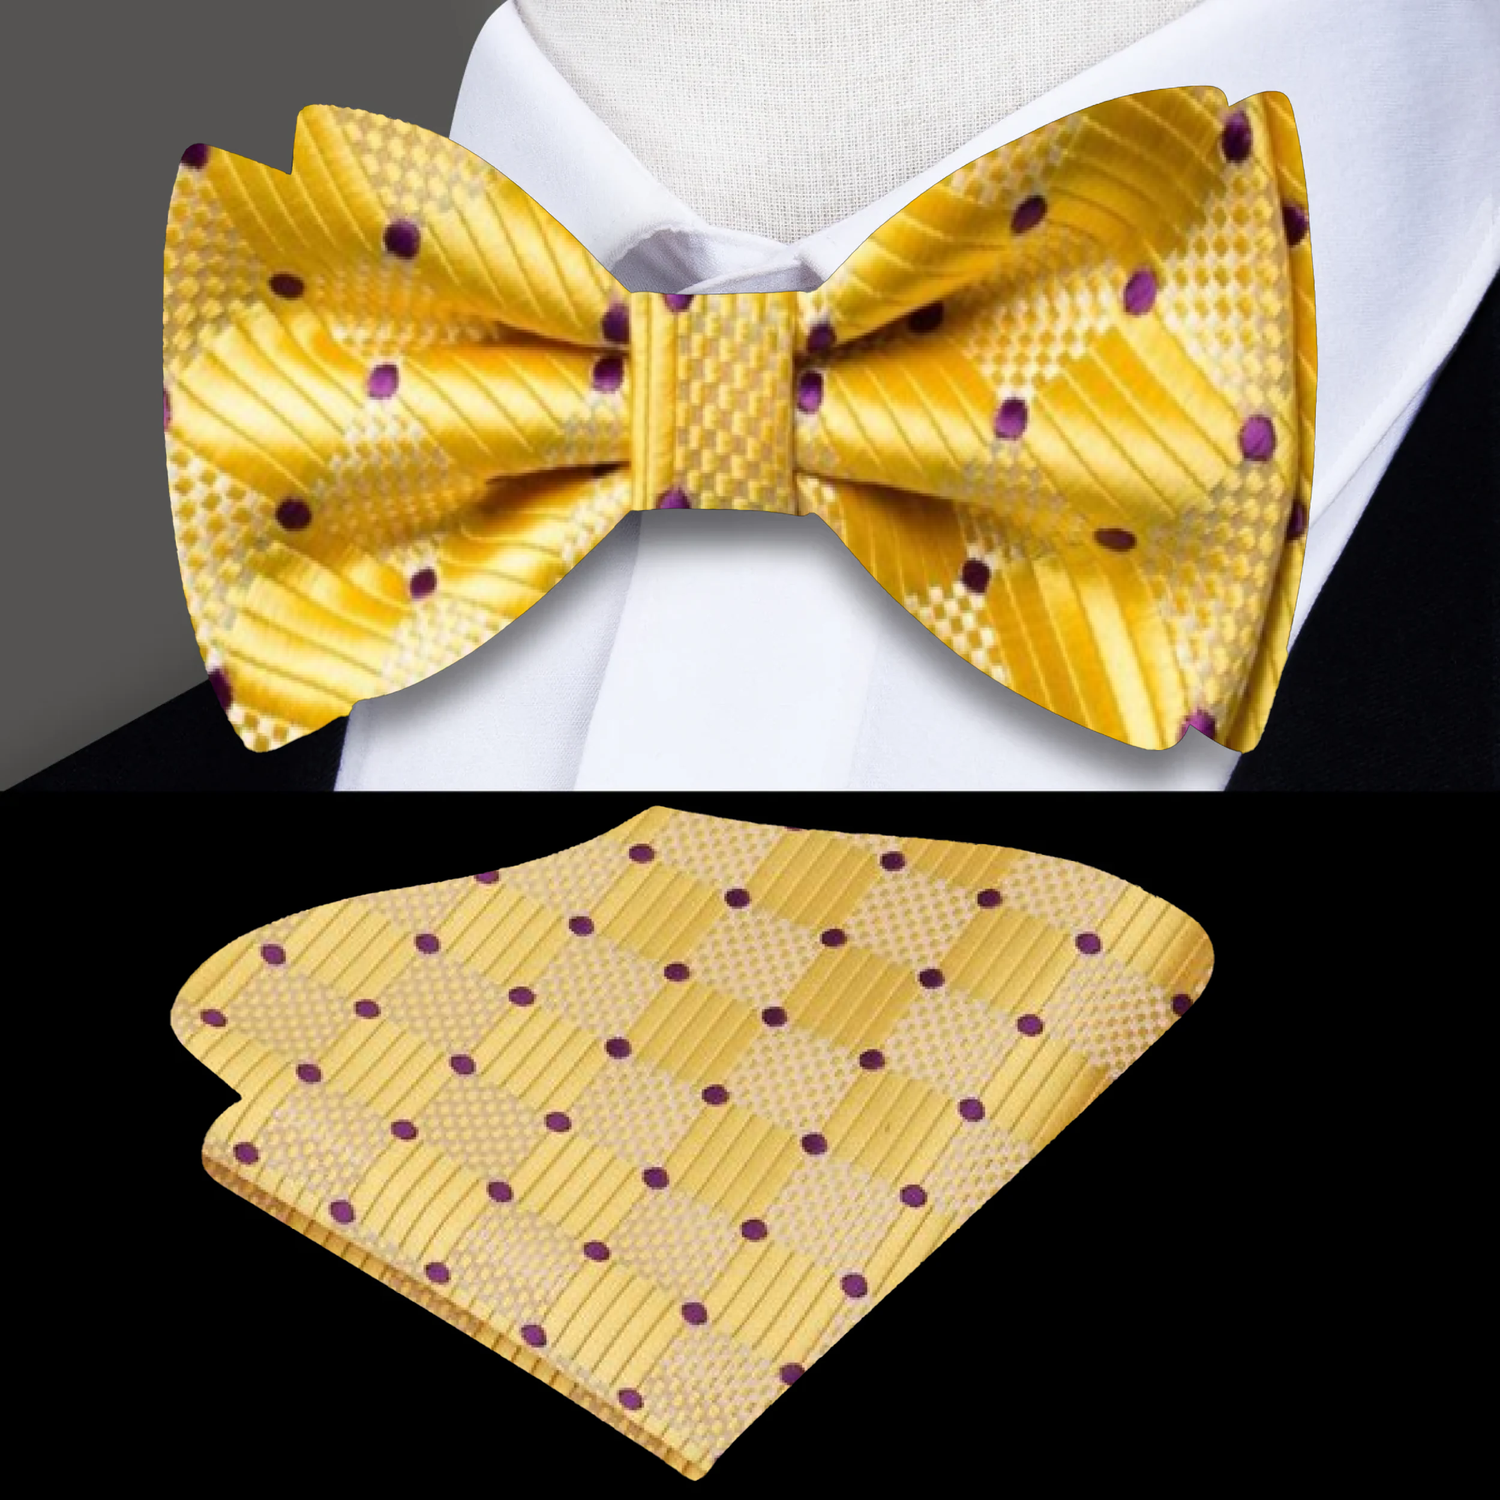 A Yellow, Purple Geometric With Dot Pattern Silk Self Tie Bow Tie, Matching Pocket Square